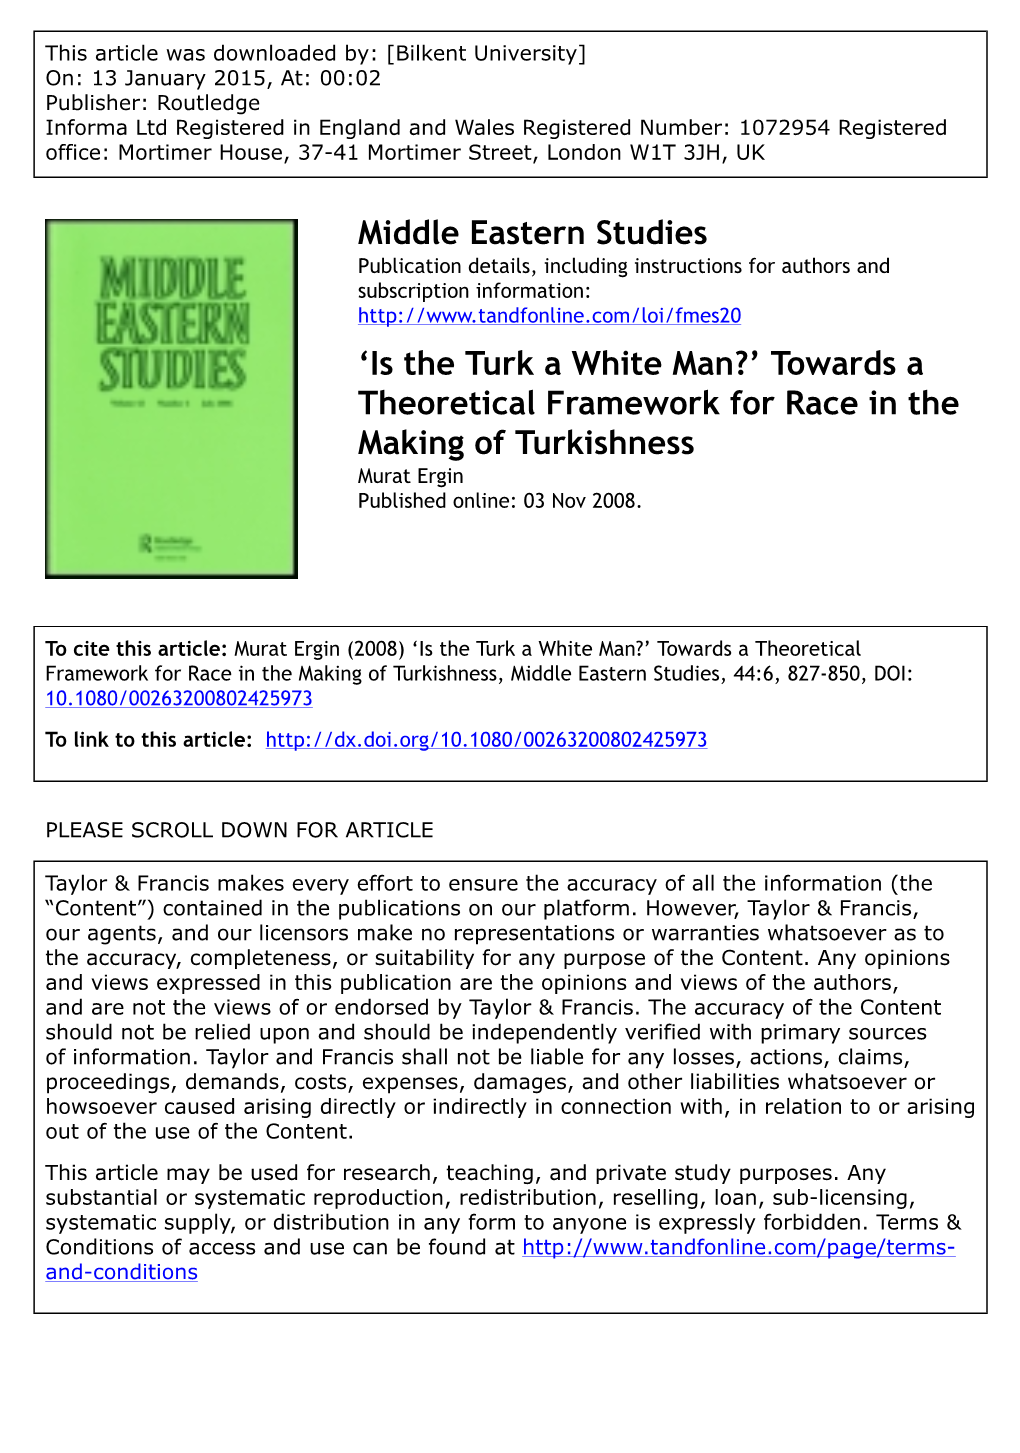 'Is the Turk a White Man?' Towards a Theoretical Framework for Race In